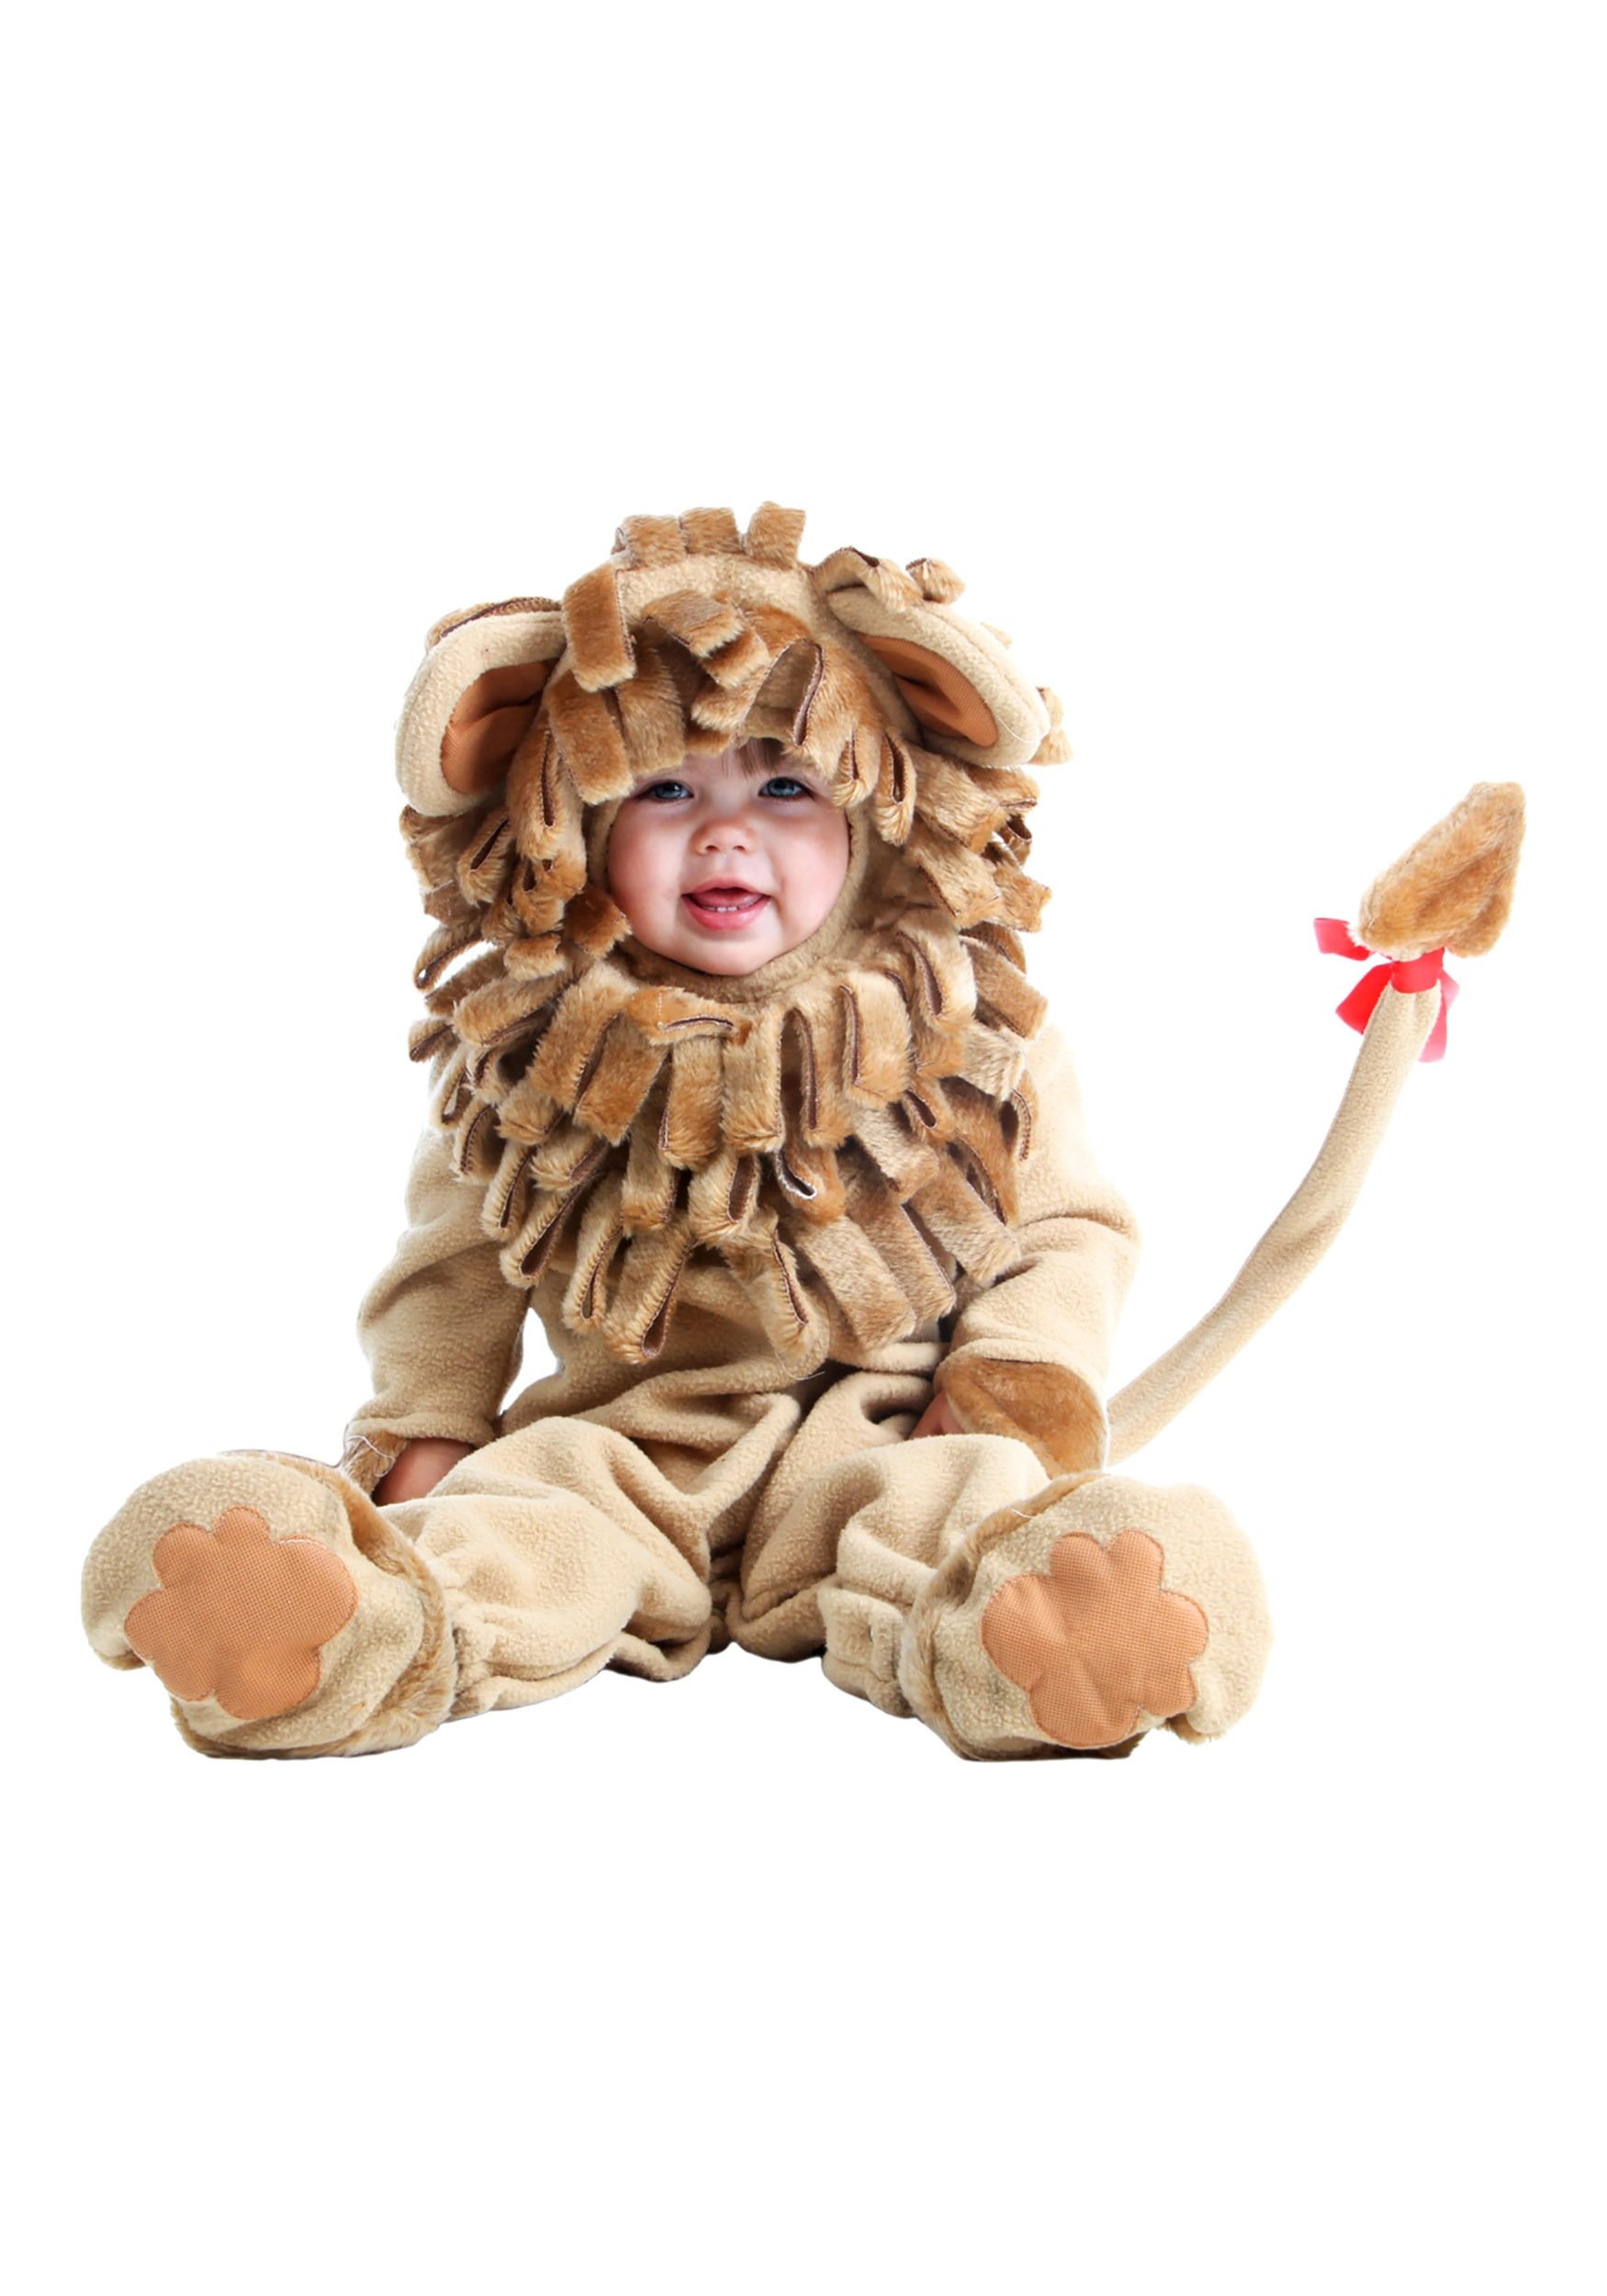 Lion Child Toddler Hooded Circus Animal Costume Cape Cloak Mantle 